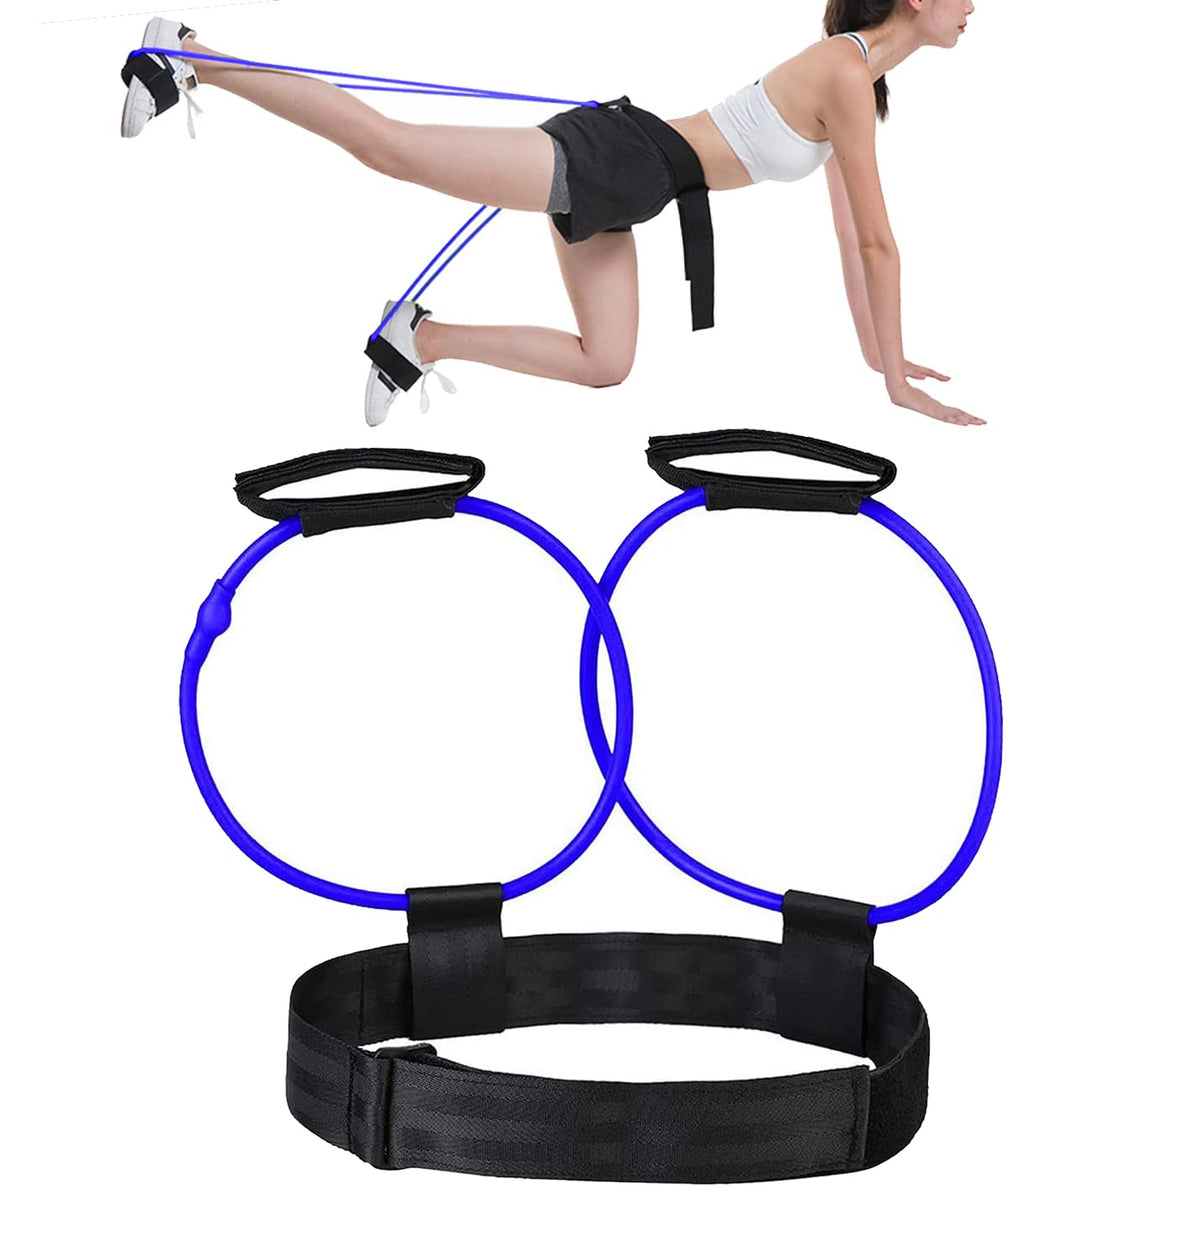 Strauss Resistance Exercise Tube | Resistance Tube for Exercise and Workout | Hip Band for Stretching, Squats, Legs, Thigh, Glutes and Hip Toning Workout | Ideal for Men & Women (Blue)